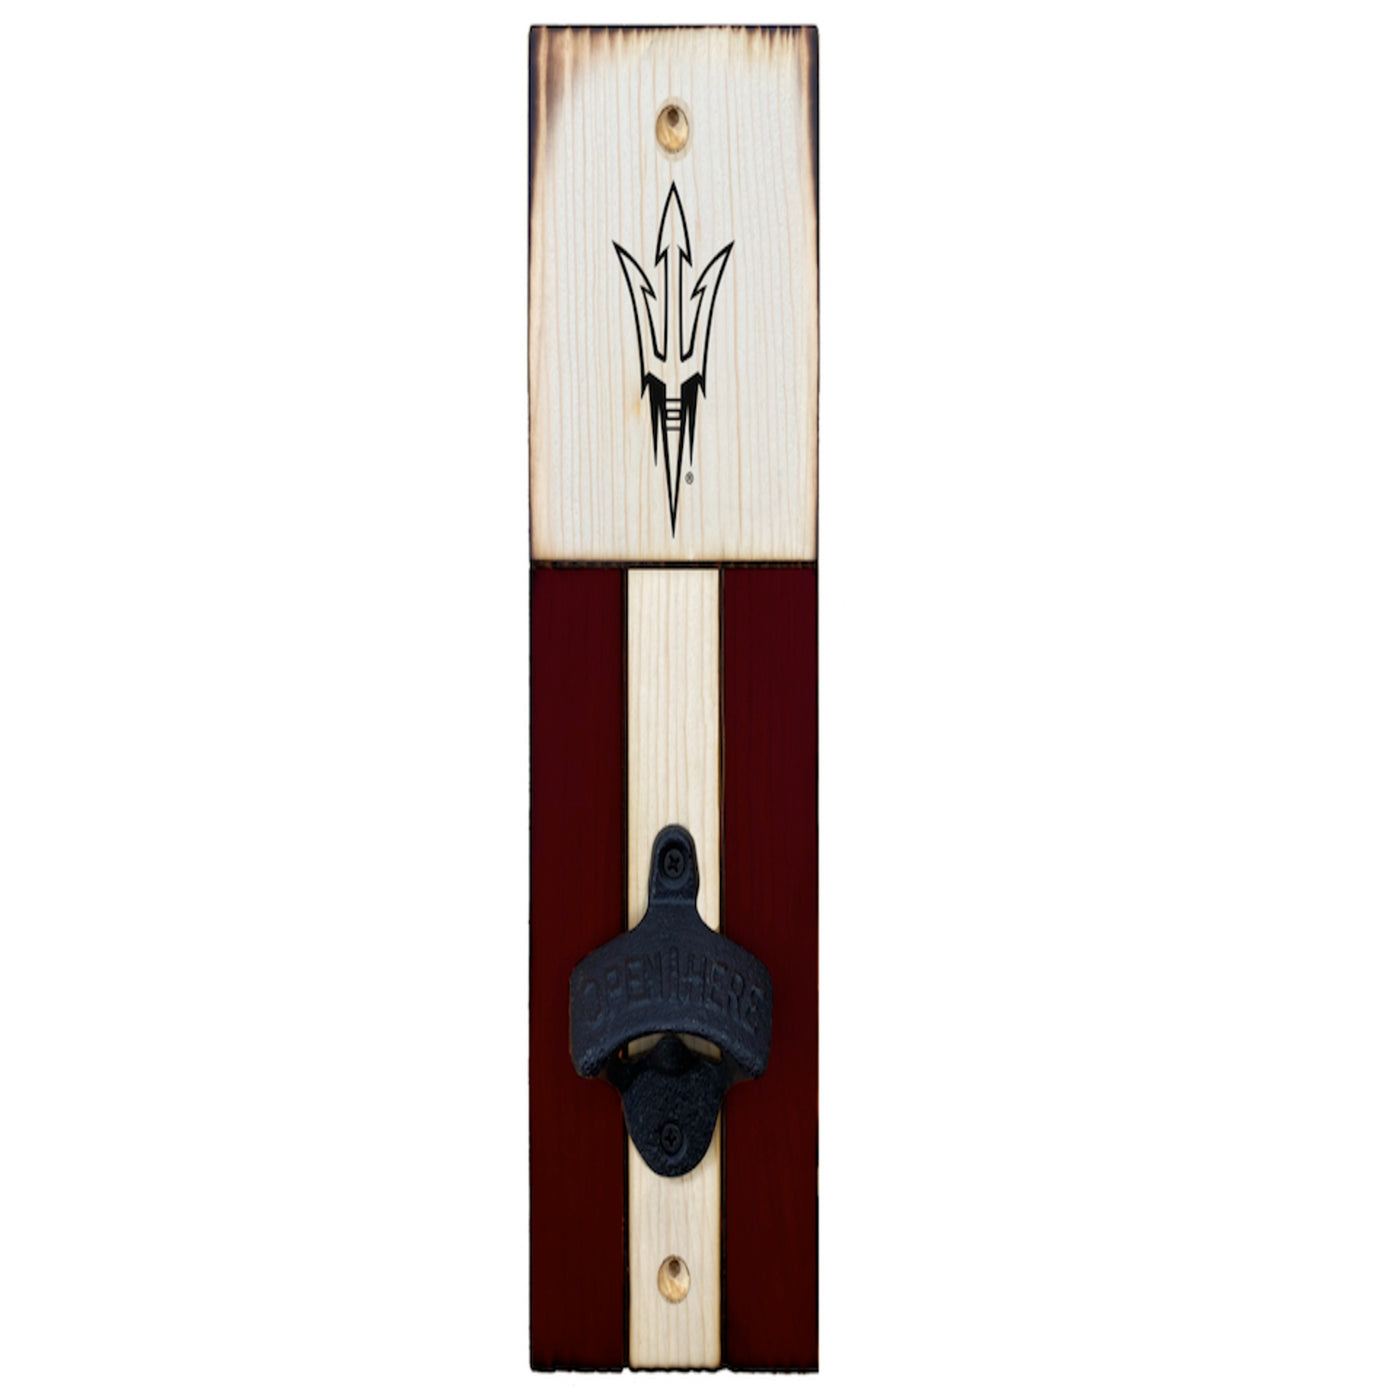 ASU wood wall mount bottle opener with carved Pitchfork at the top and maroon and pale wood panels at the bottom